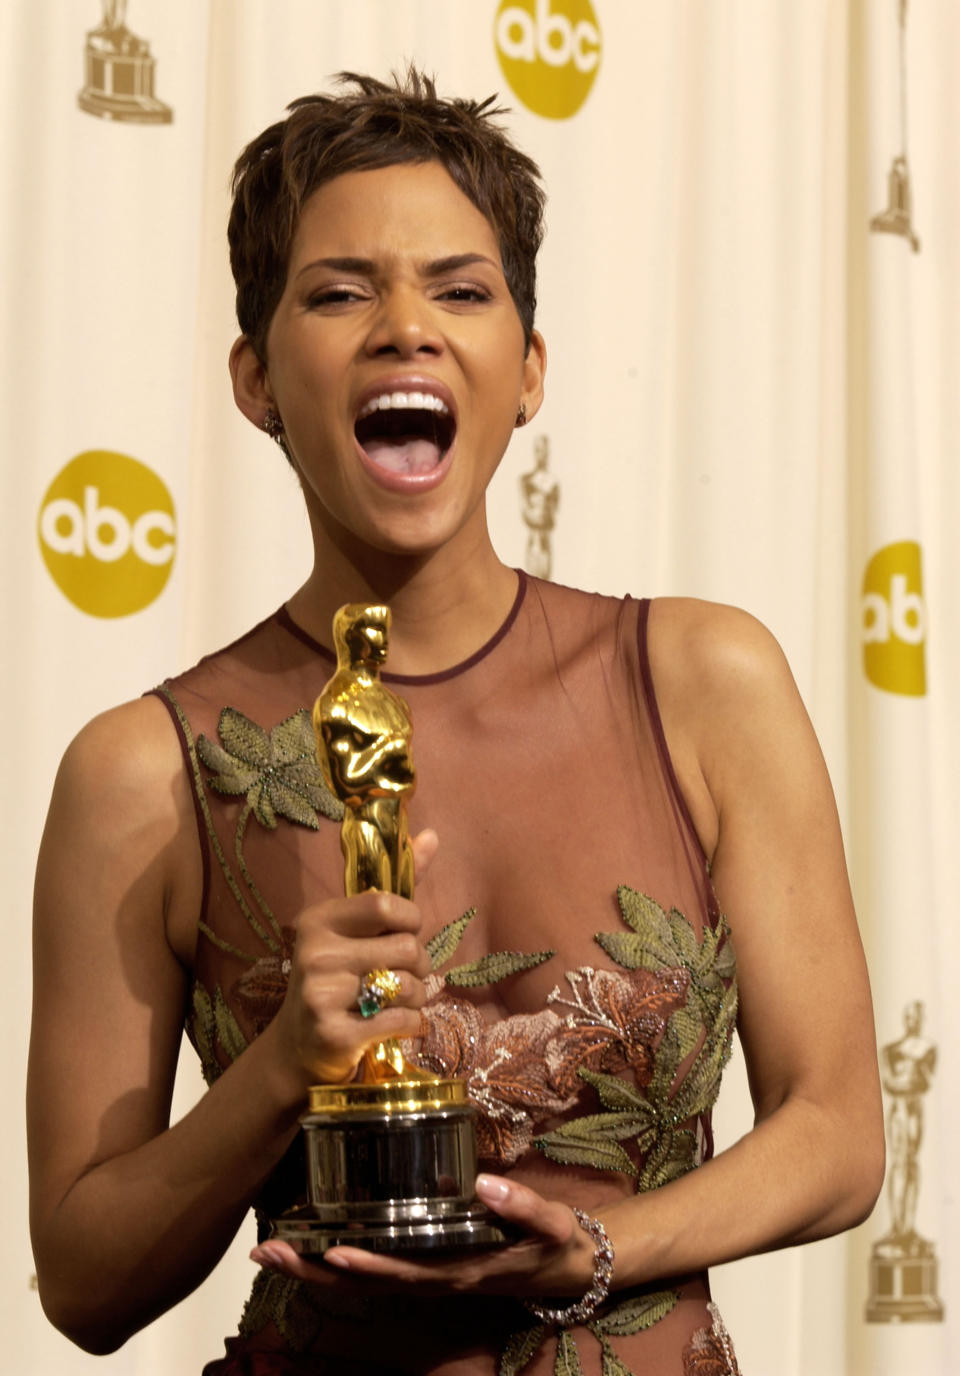 <p>2002 – HALLE BERRY – ENTERTAINMENT – First African-American woman to win the Academy Award for Best Actress. — Halle Berry poses with her ‘Actress in a Leading Role’ Oscar for ‘Monster’s Ball’ at the Kodak Theater in Hollywood, California on March 25, 2002. (Steve Granitz/WireImage via Getty Images) </p>